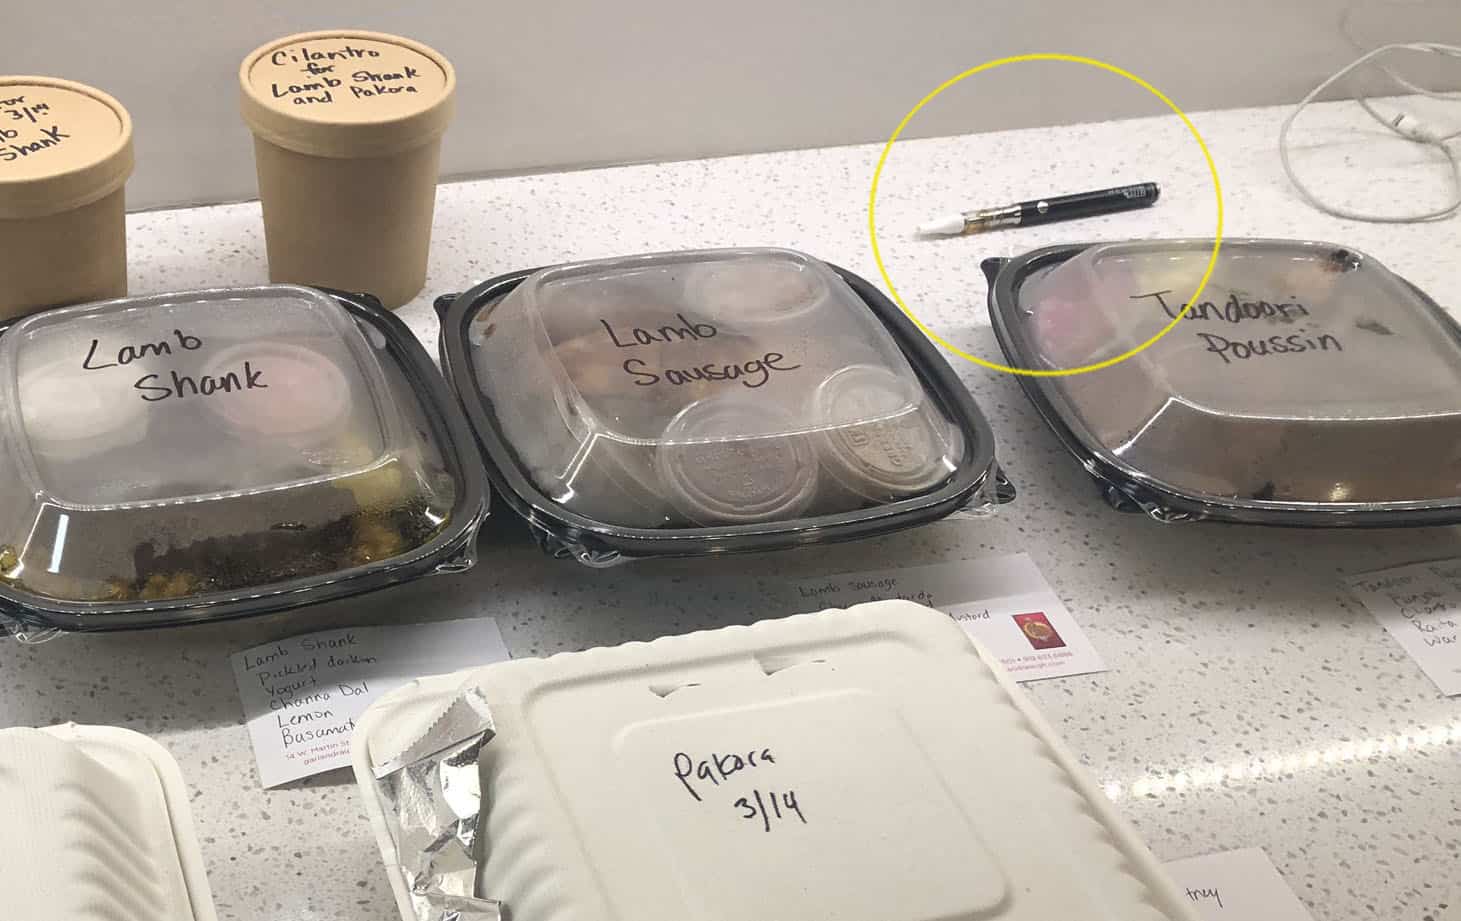 Is That A Marijuana Vape Pen in NC Mayor's Take-Out Photo? | The Jeffrey Lord